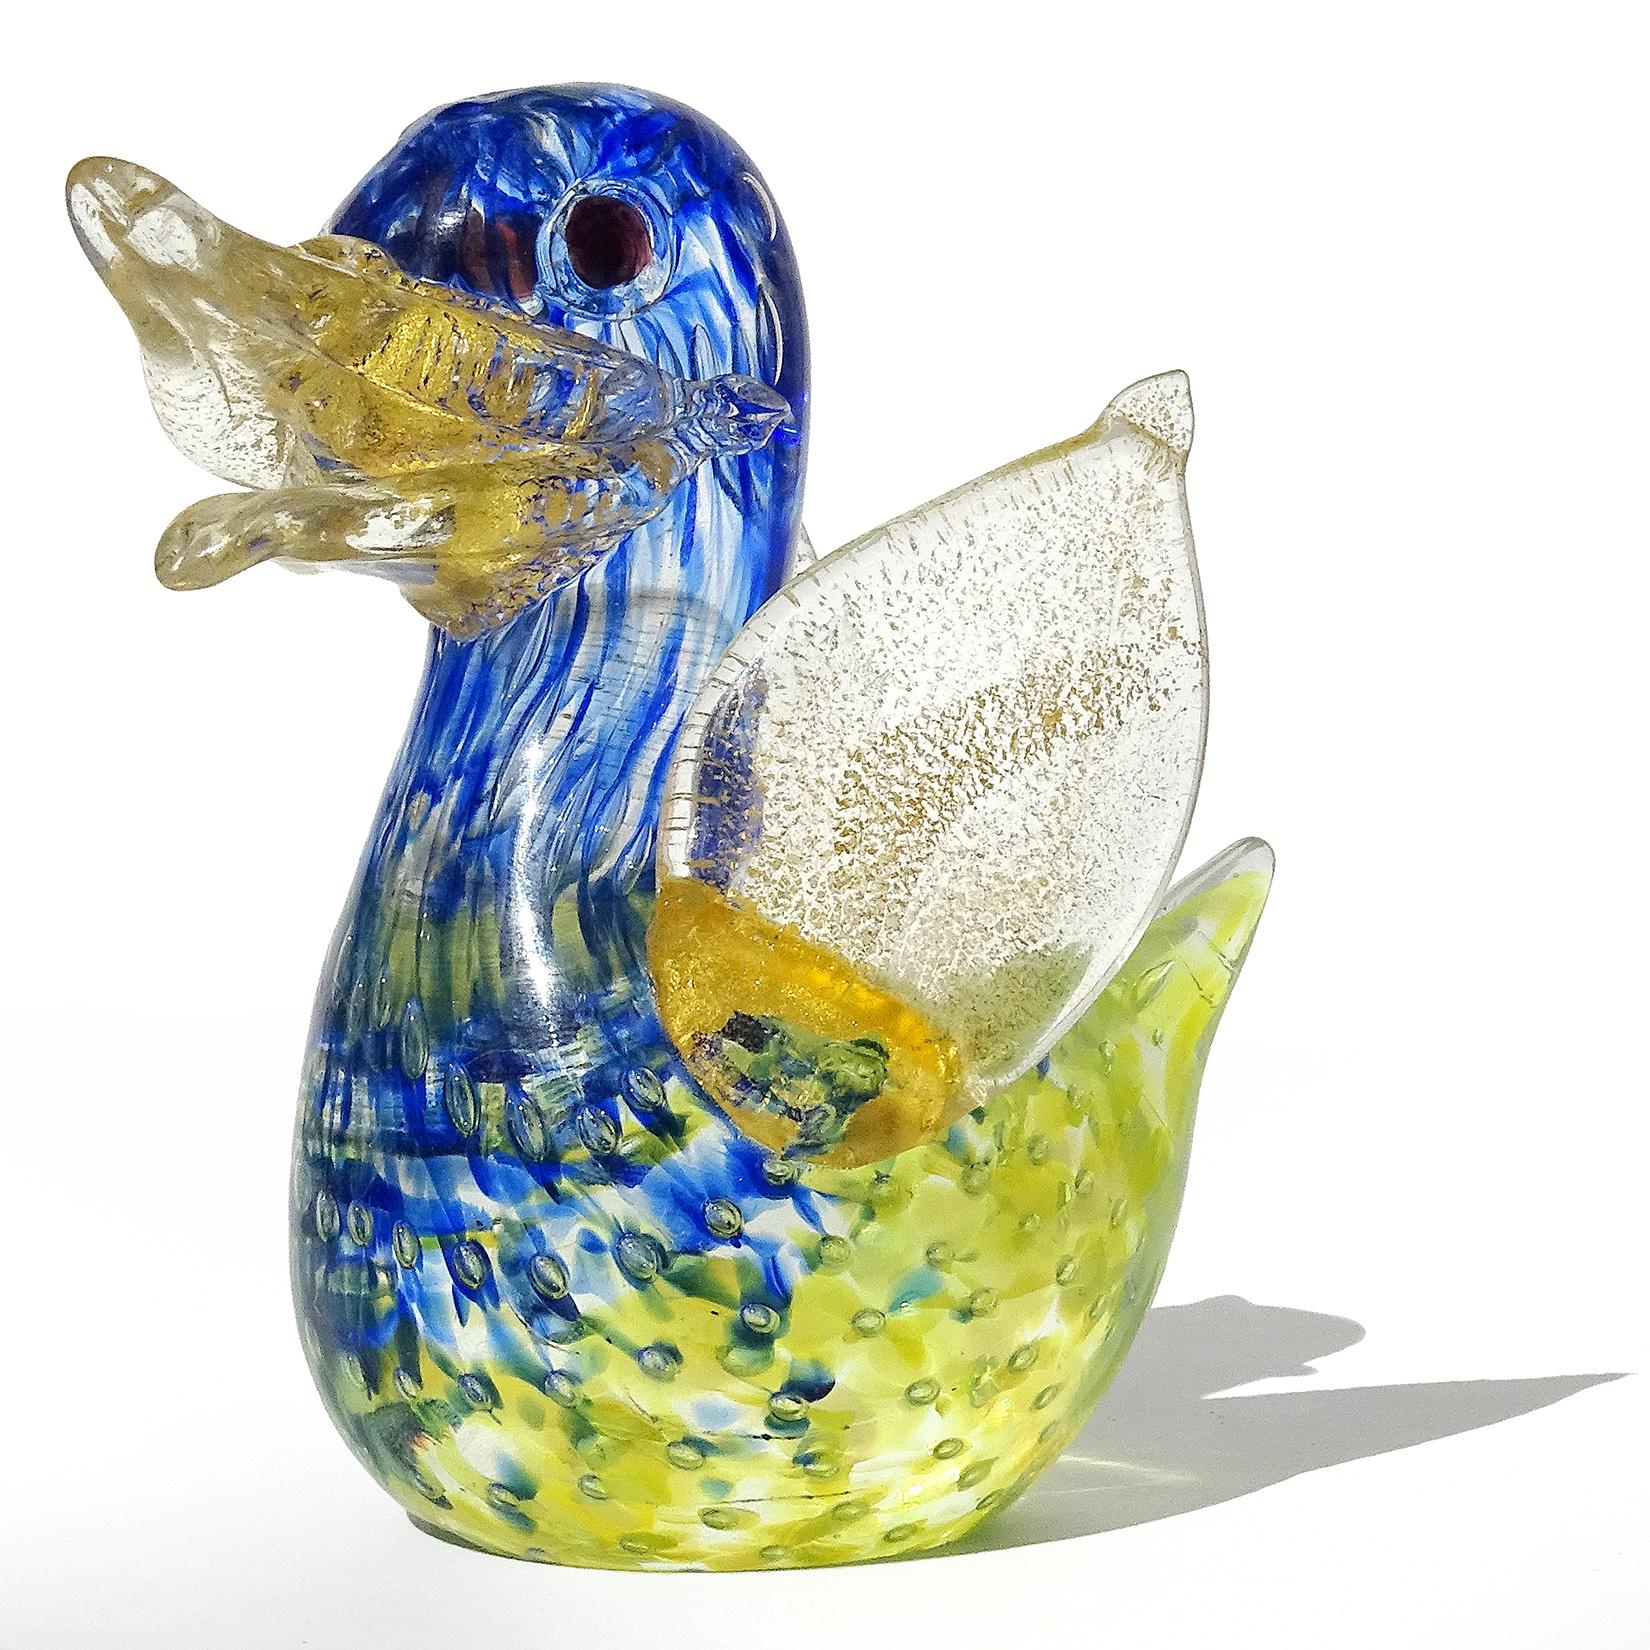 Beautiful vintage Murano hand blown cobalt blue, yellow, gold flecks and bubbles Italian art glass baby bird figurine. Documented to the Barovier e Toso Company. The bird is made with the controlled bubble 